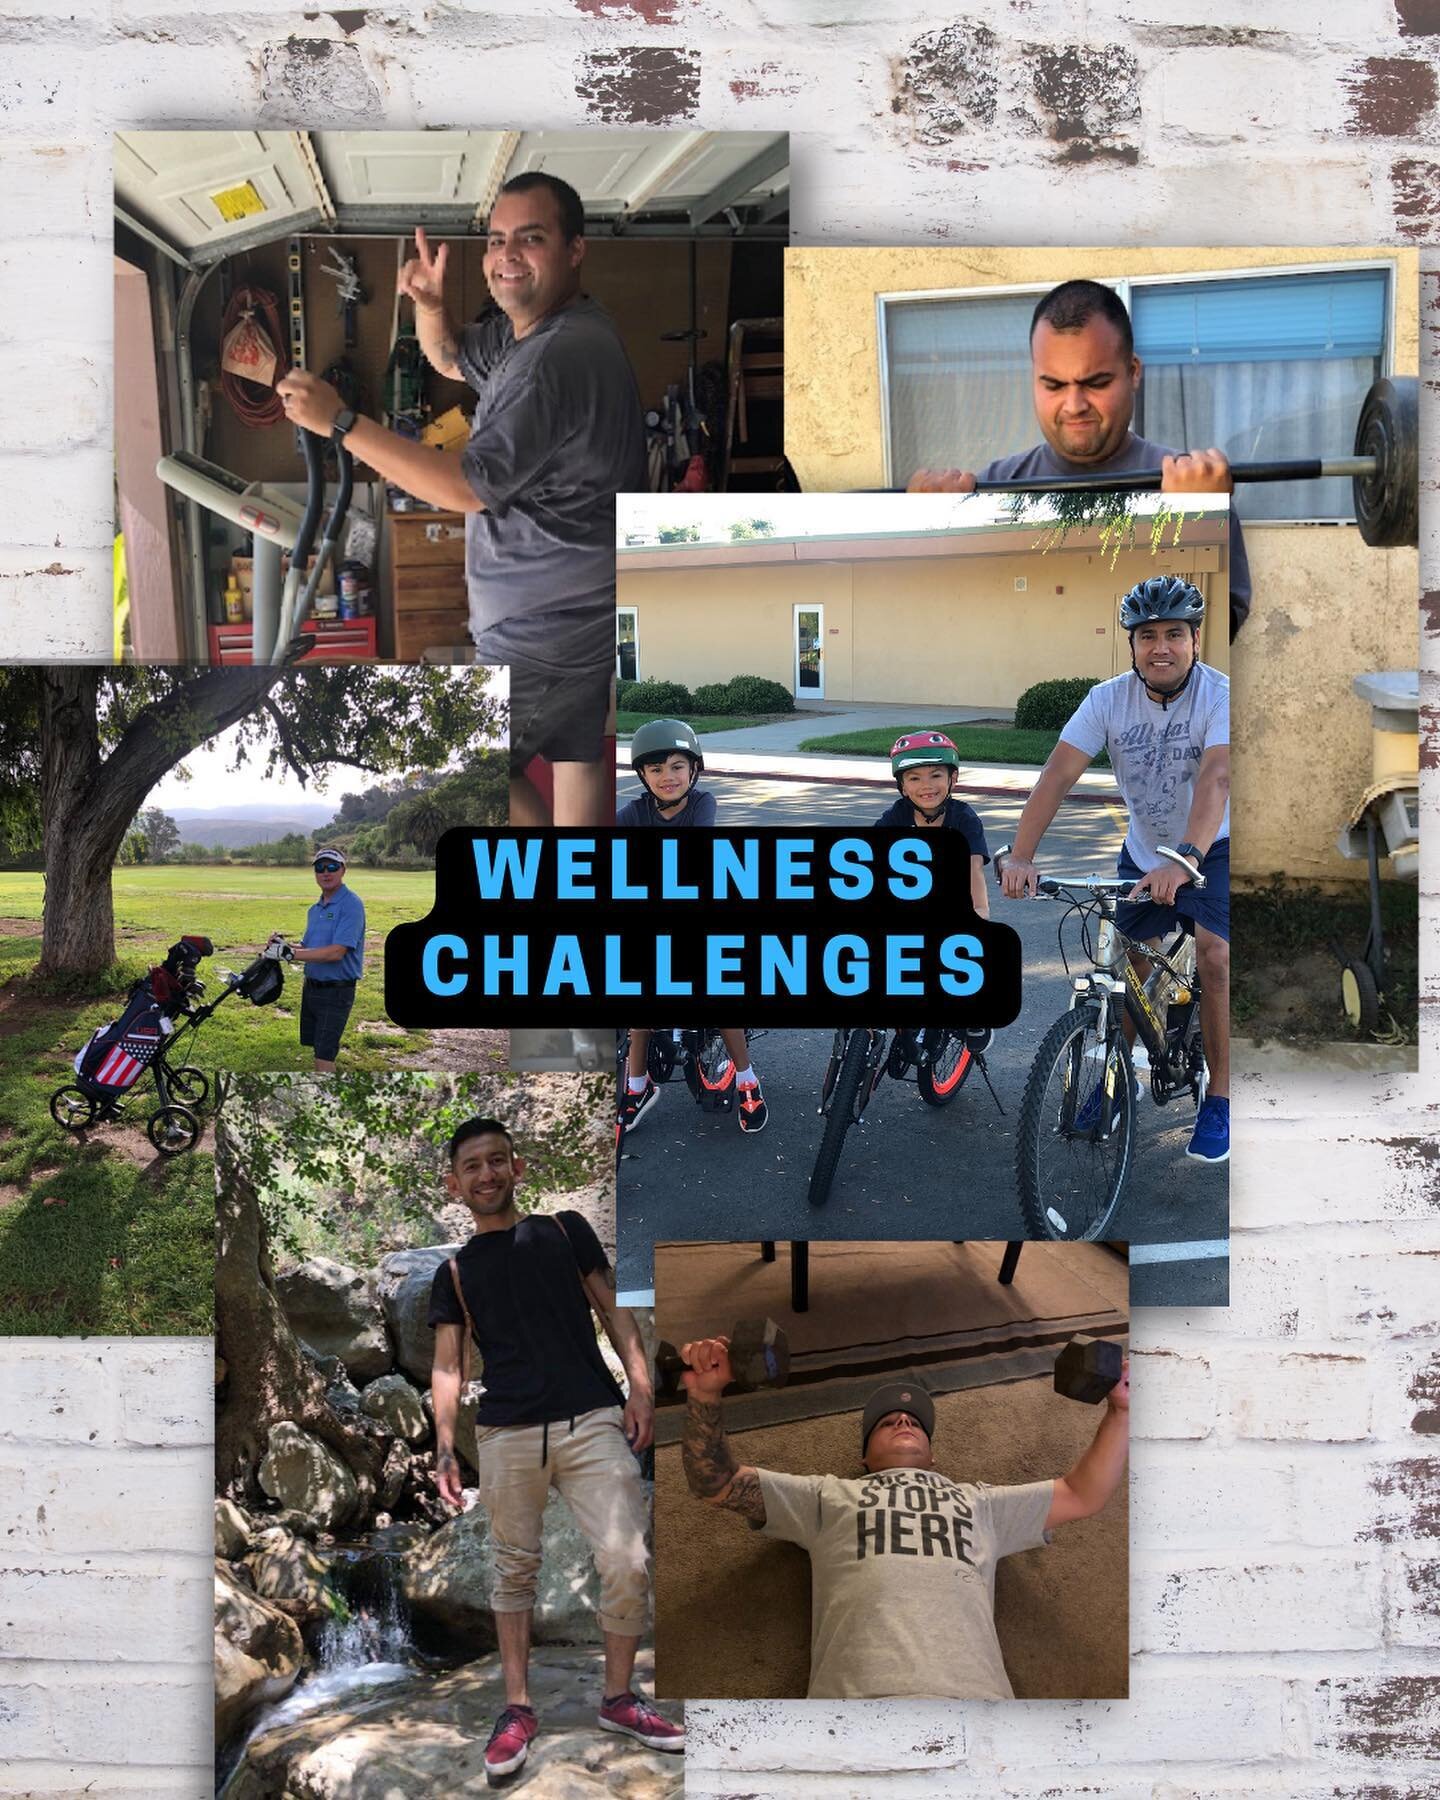 Wellness challenges! Ever get paid to be healthy? We know that taking care of yourself is important, and we incentivize our team to be as active as they can be by having wellness challenges. When they have completed their challenges they get $ in the